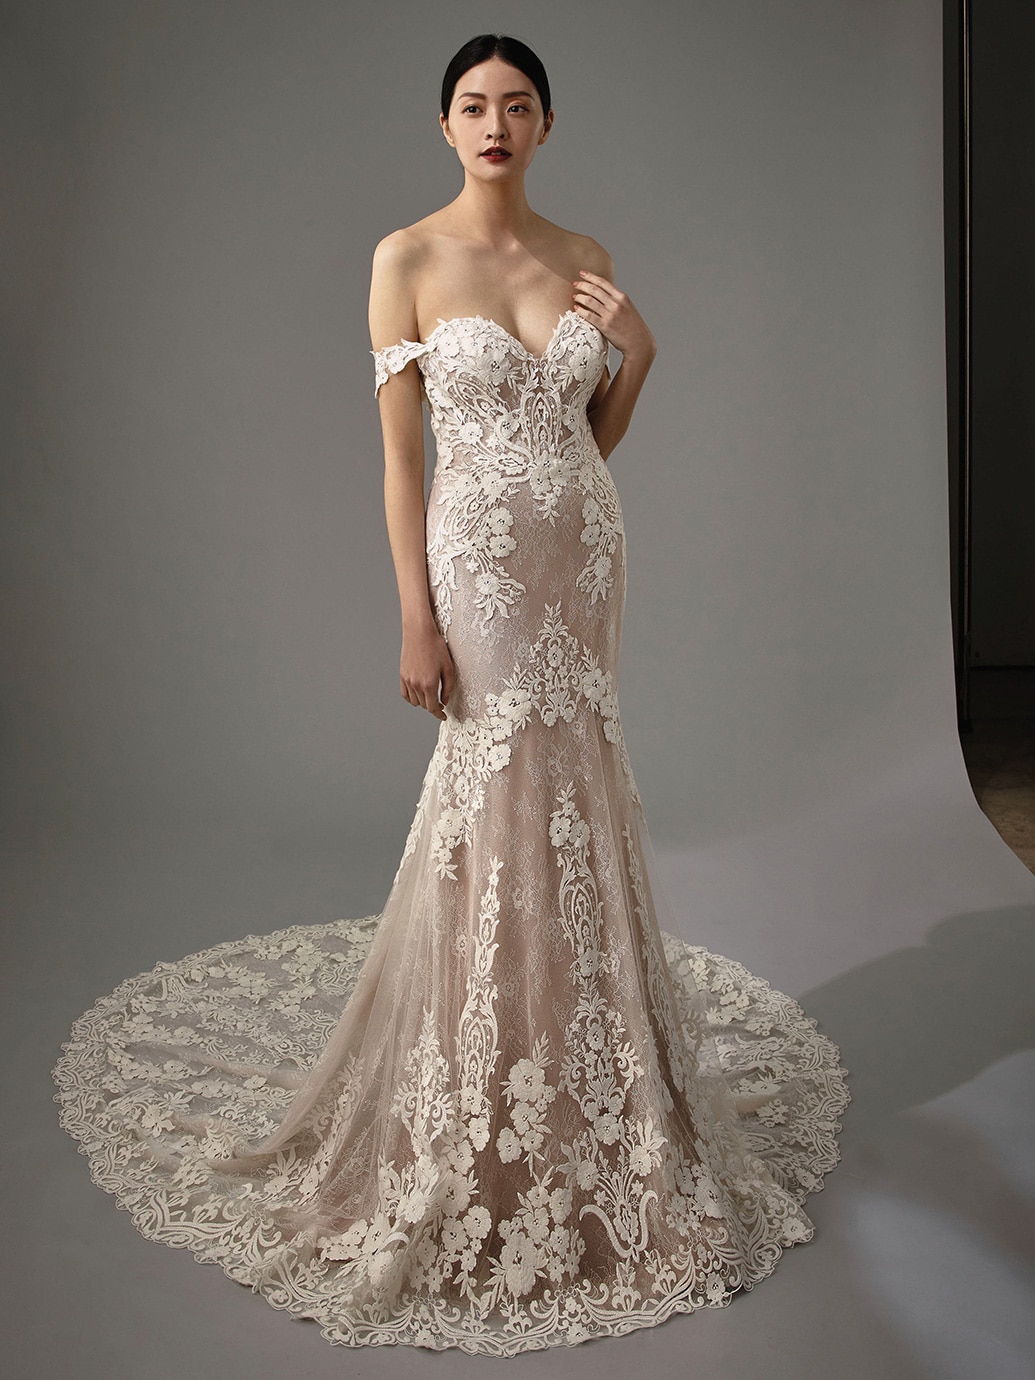 Blue By Enzoani Wedding Dress and Bridal Gown Collection | Bridal ...